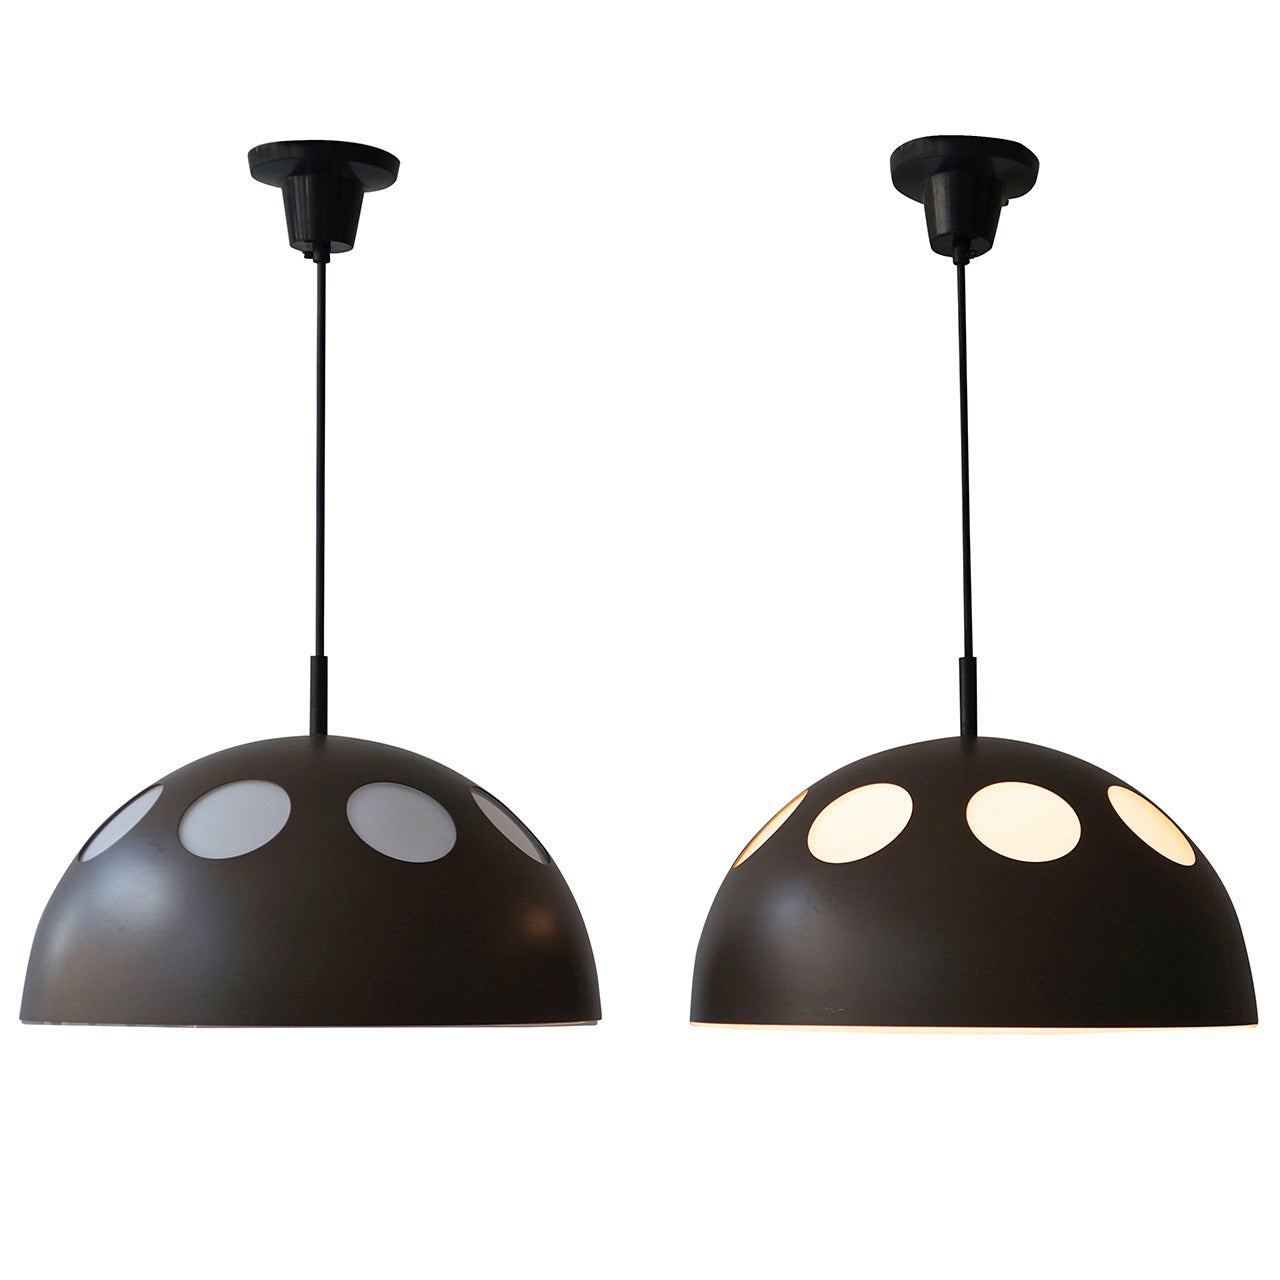 One of Two Pendant Lamps by RAAK